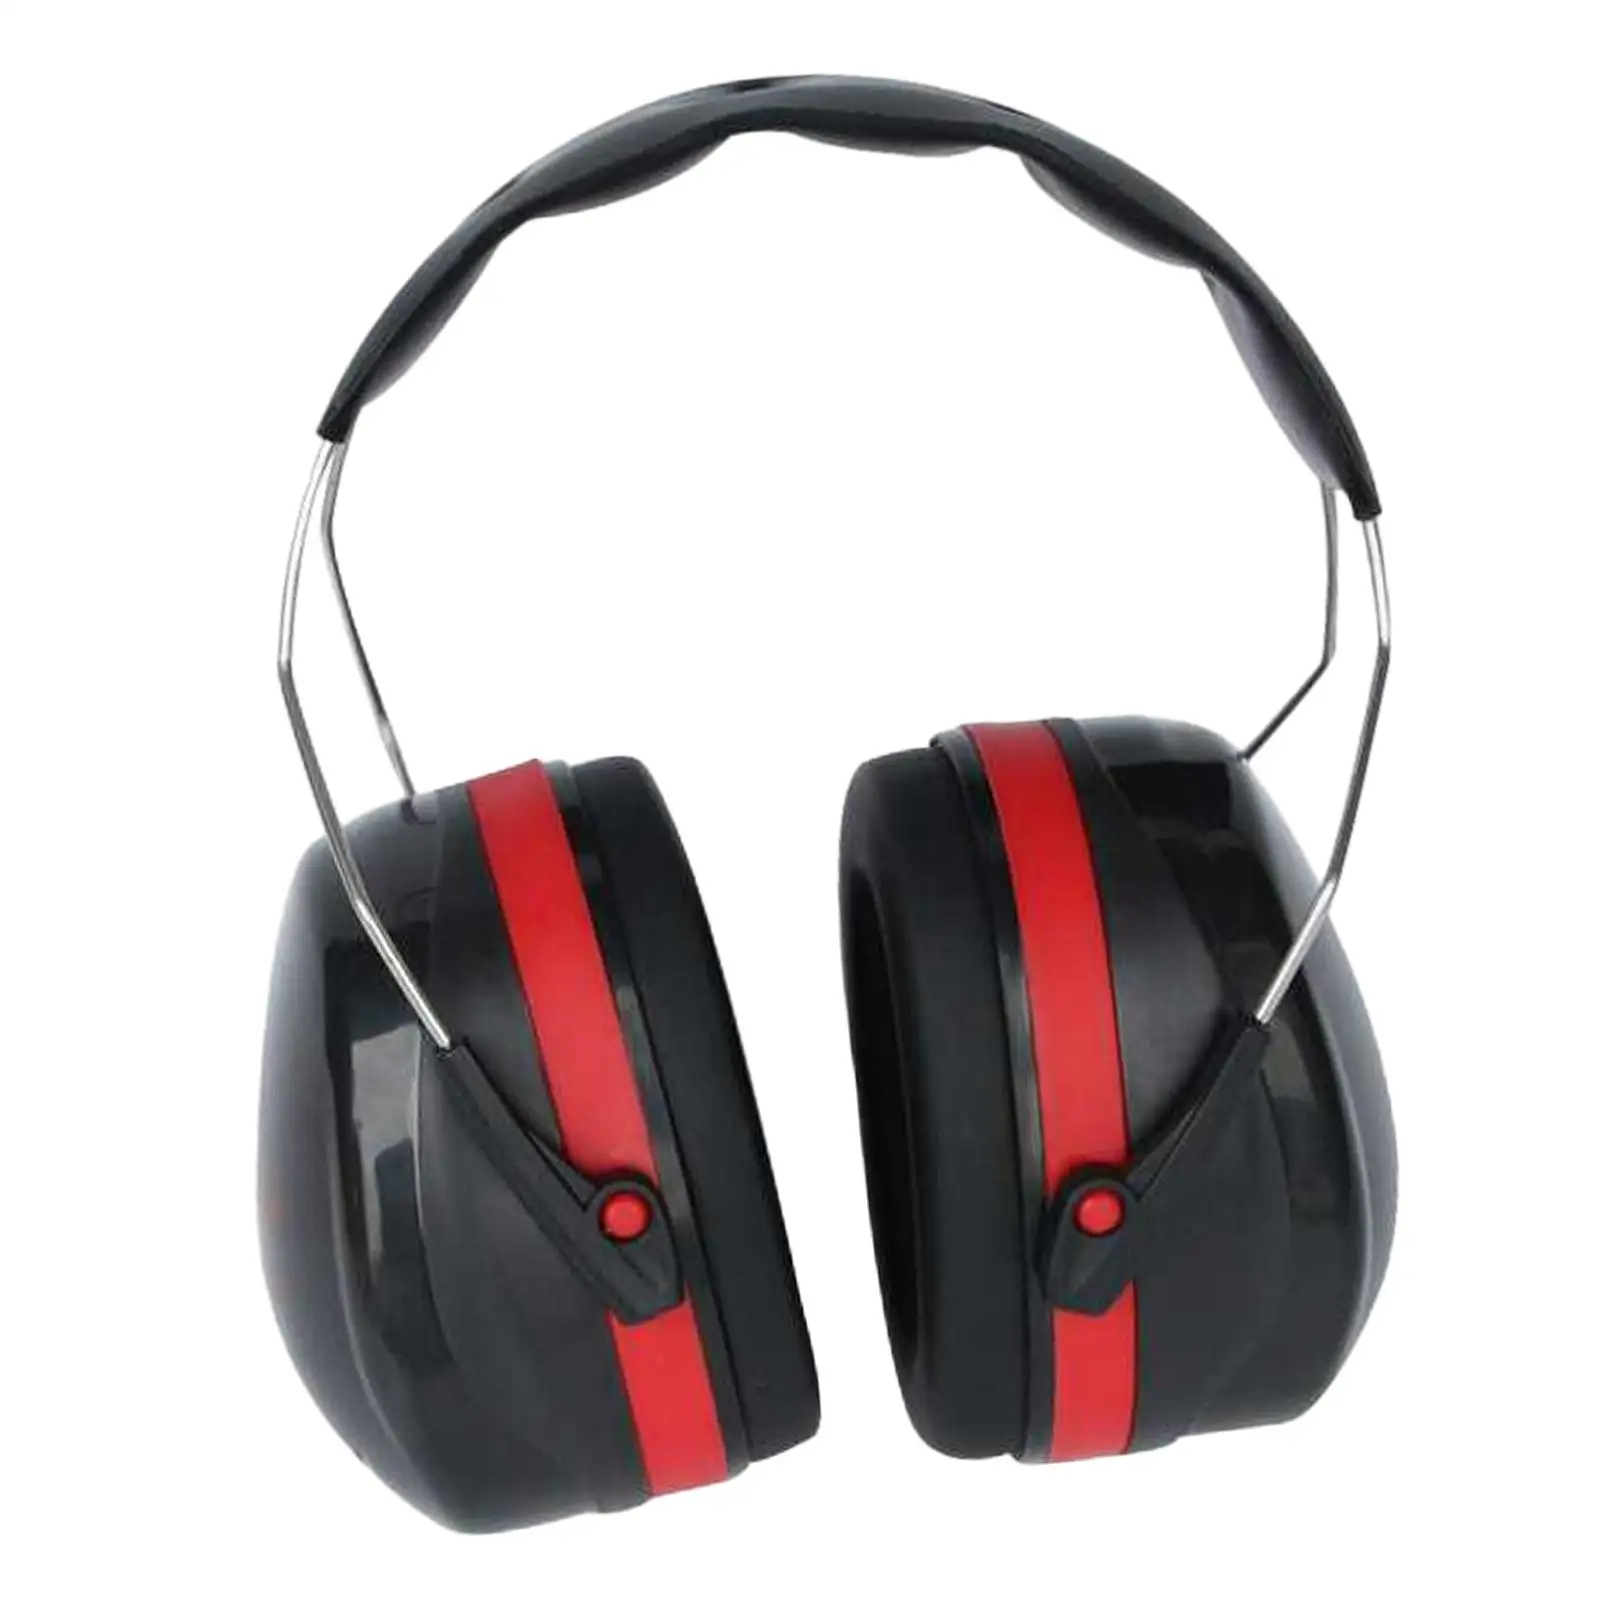 Noise Reduction Headphones Anti Noise Noise Cancelling No Pressure to Wear for Workshop Mowing Lawn Airplane Play Drum